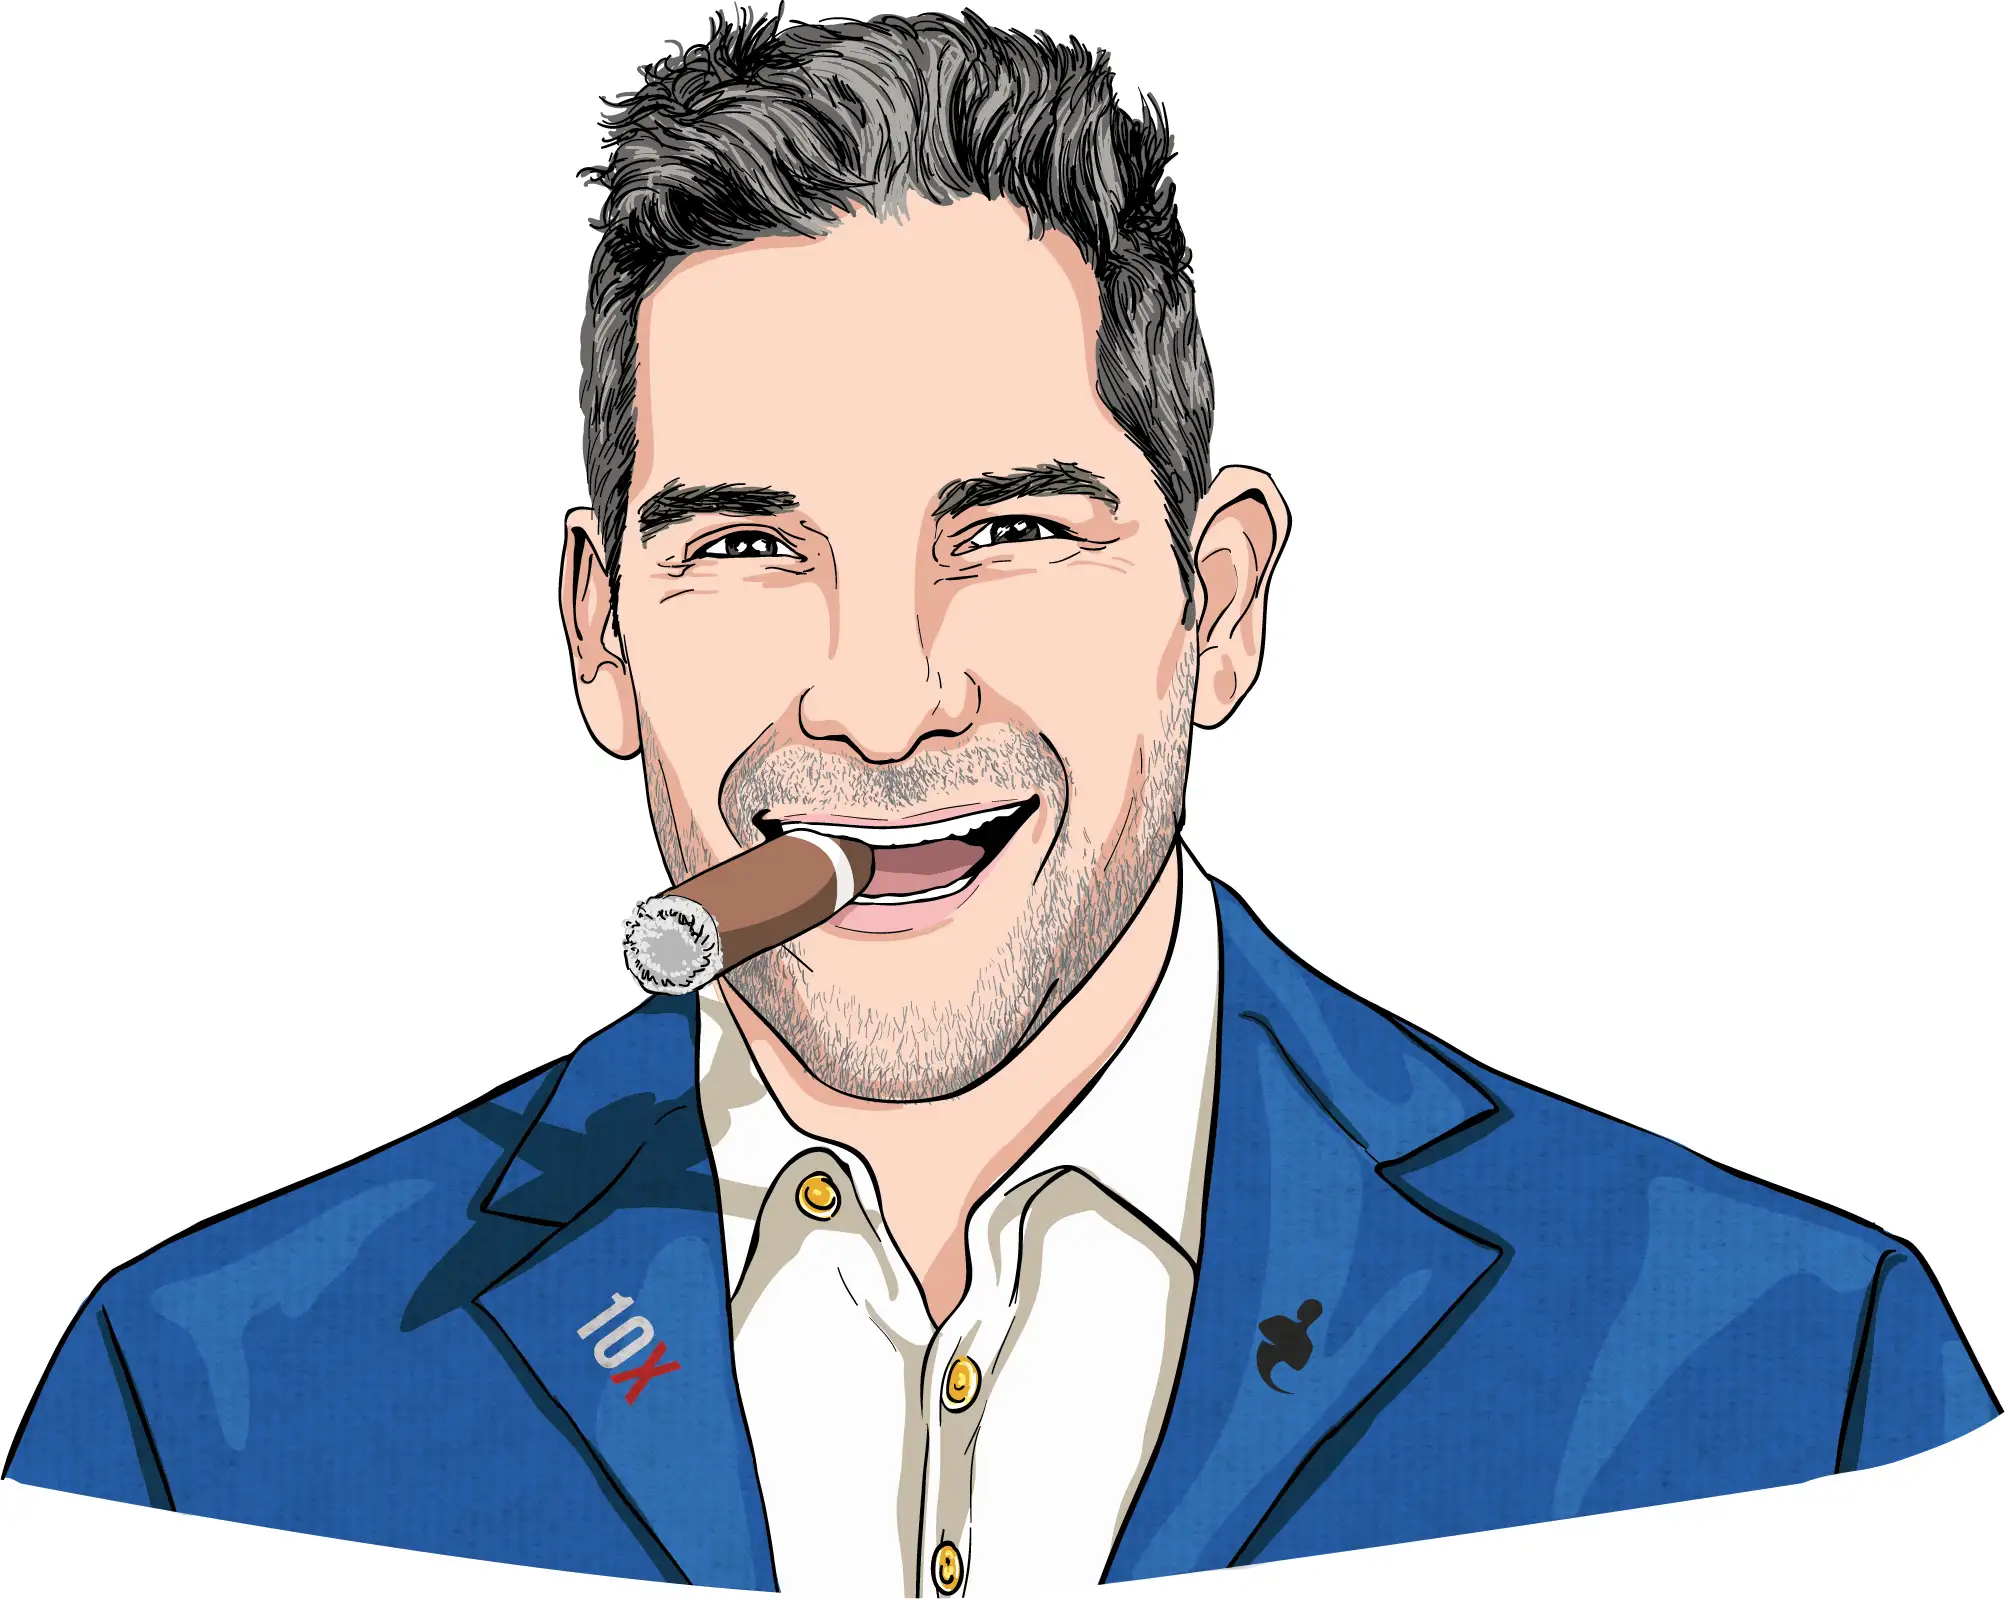 grant-cardone-with-cigar-drawing